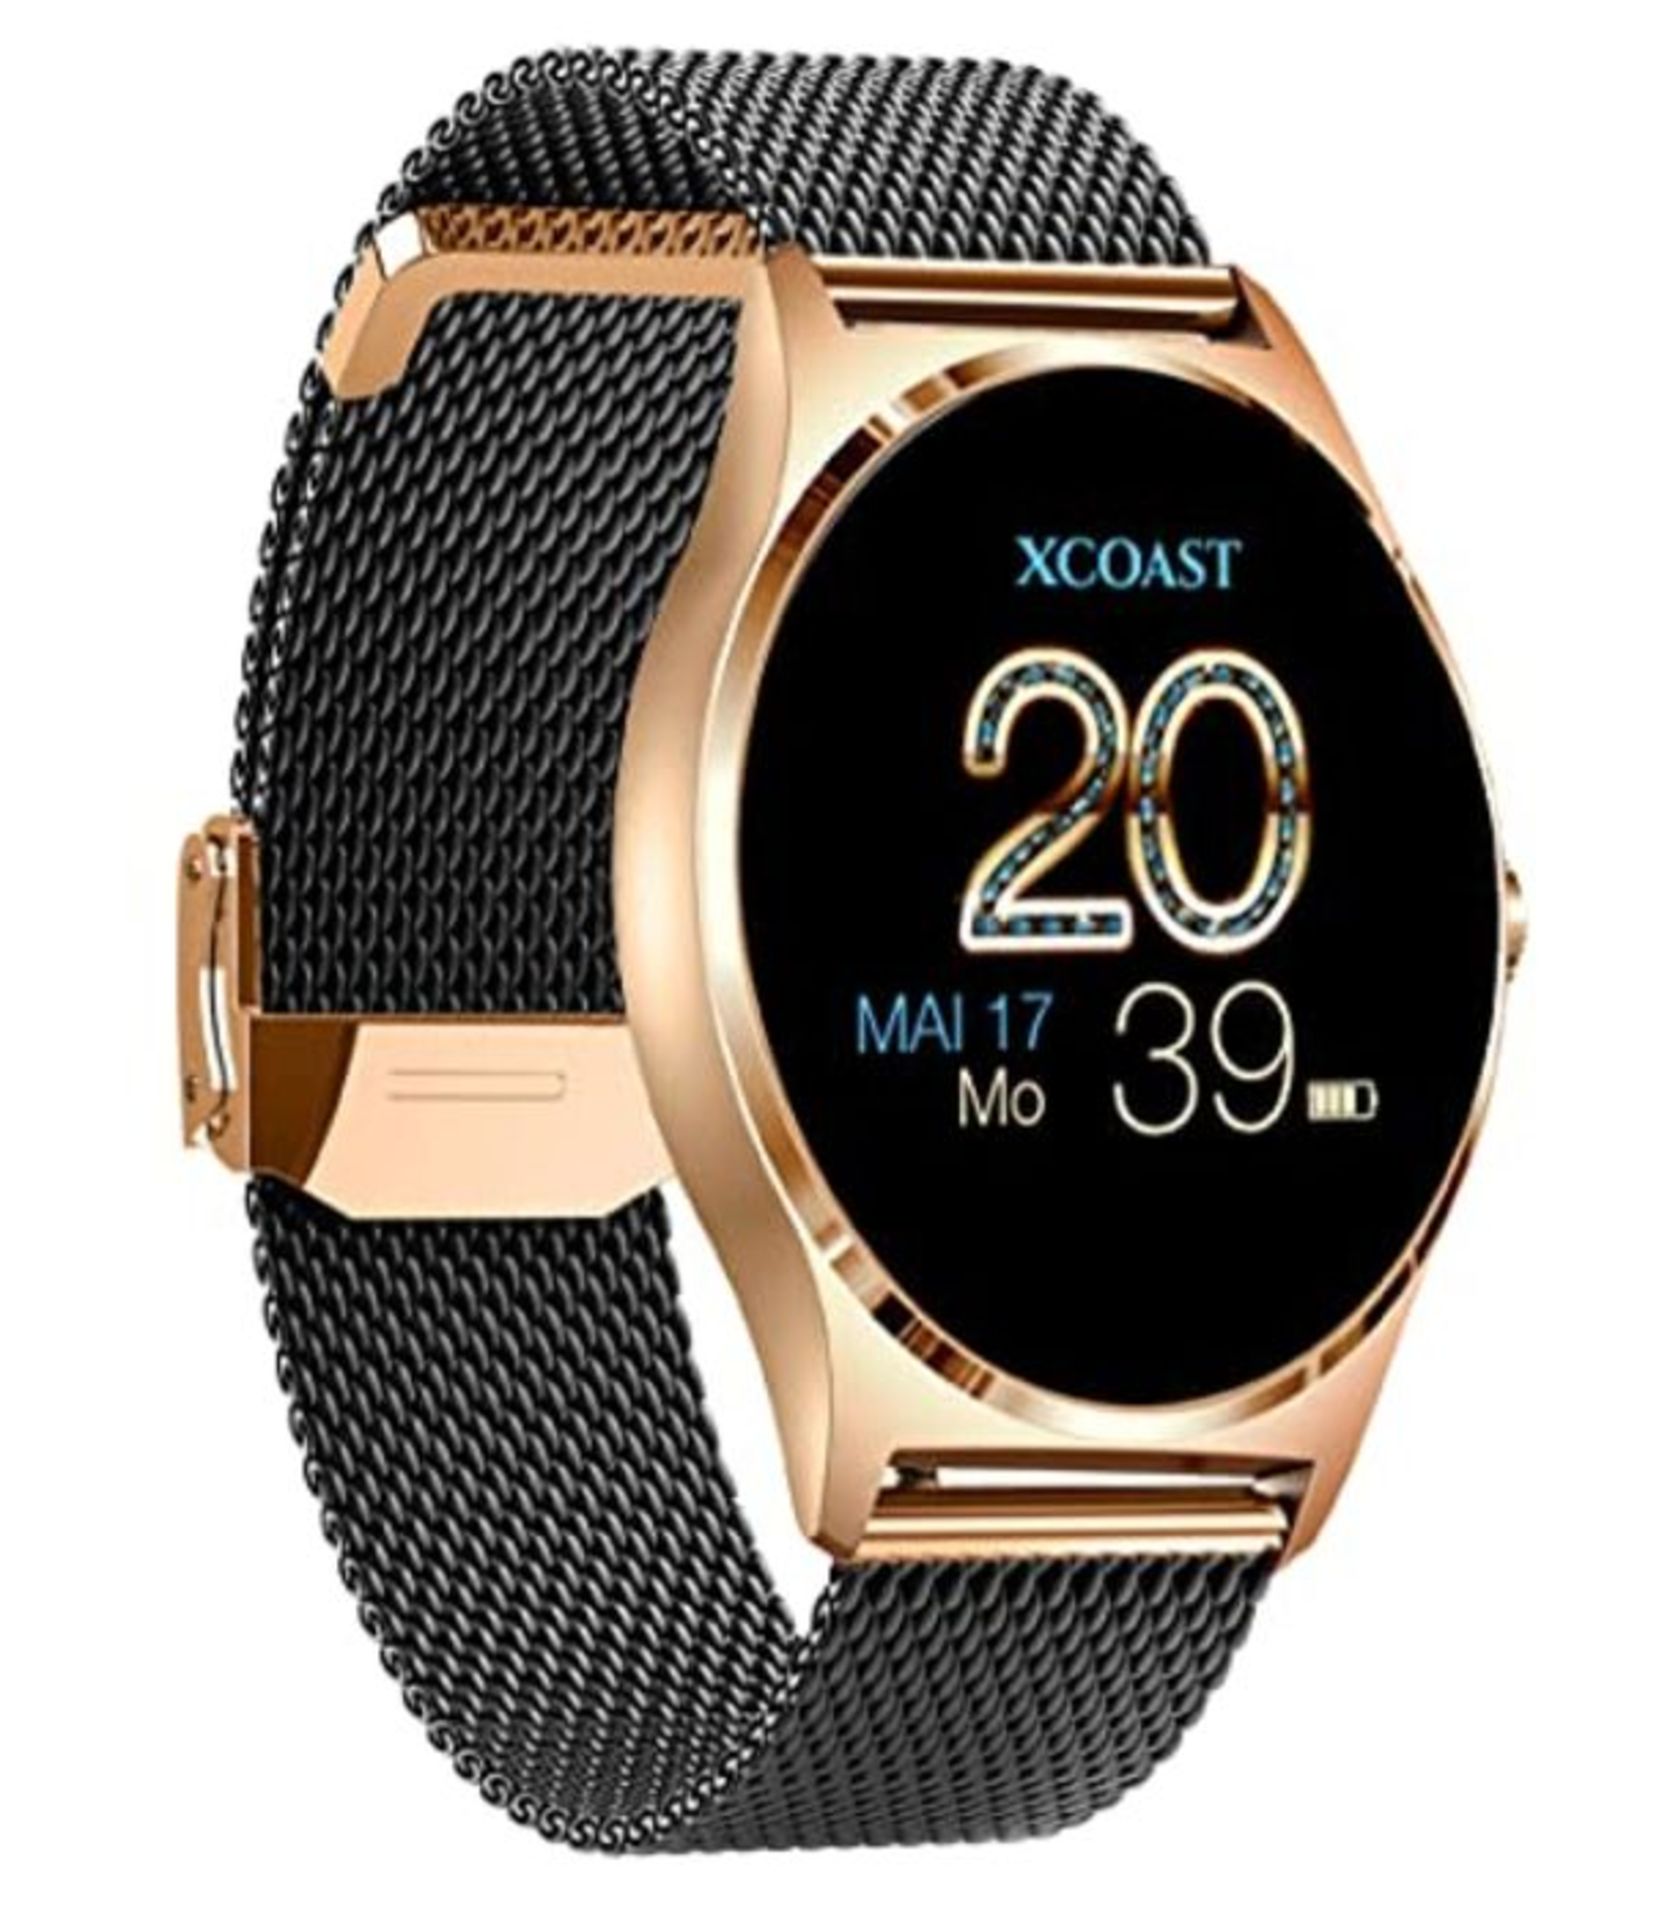 RRP £74.00 [CRACKED] X-WATCH JOLI XW PRO-Smartwatch Damen iOS/iPhone-Fitnessuhr-Android mit Whats